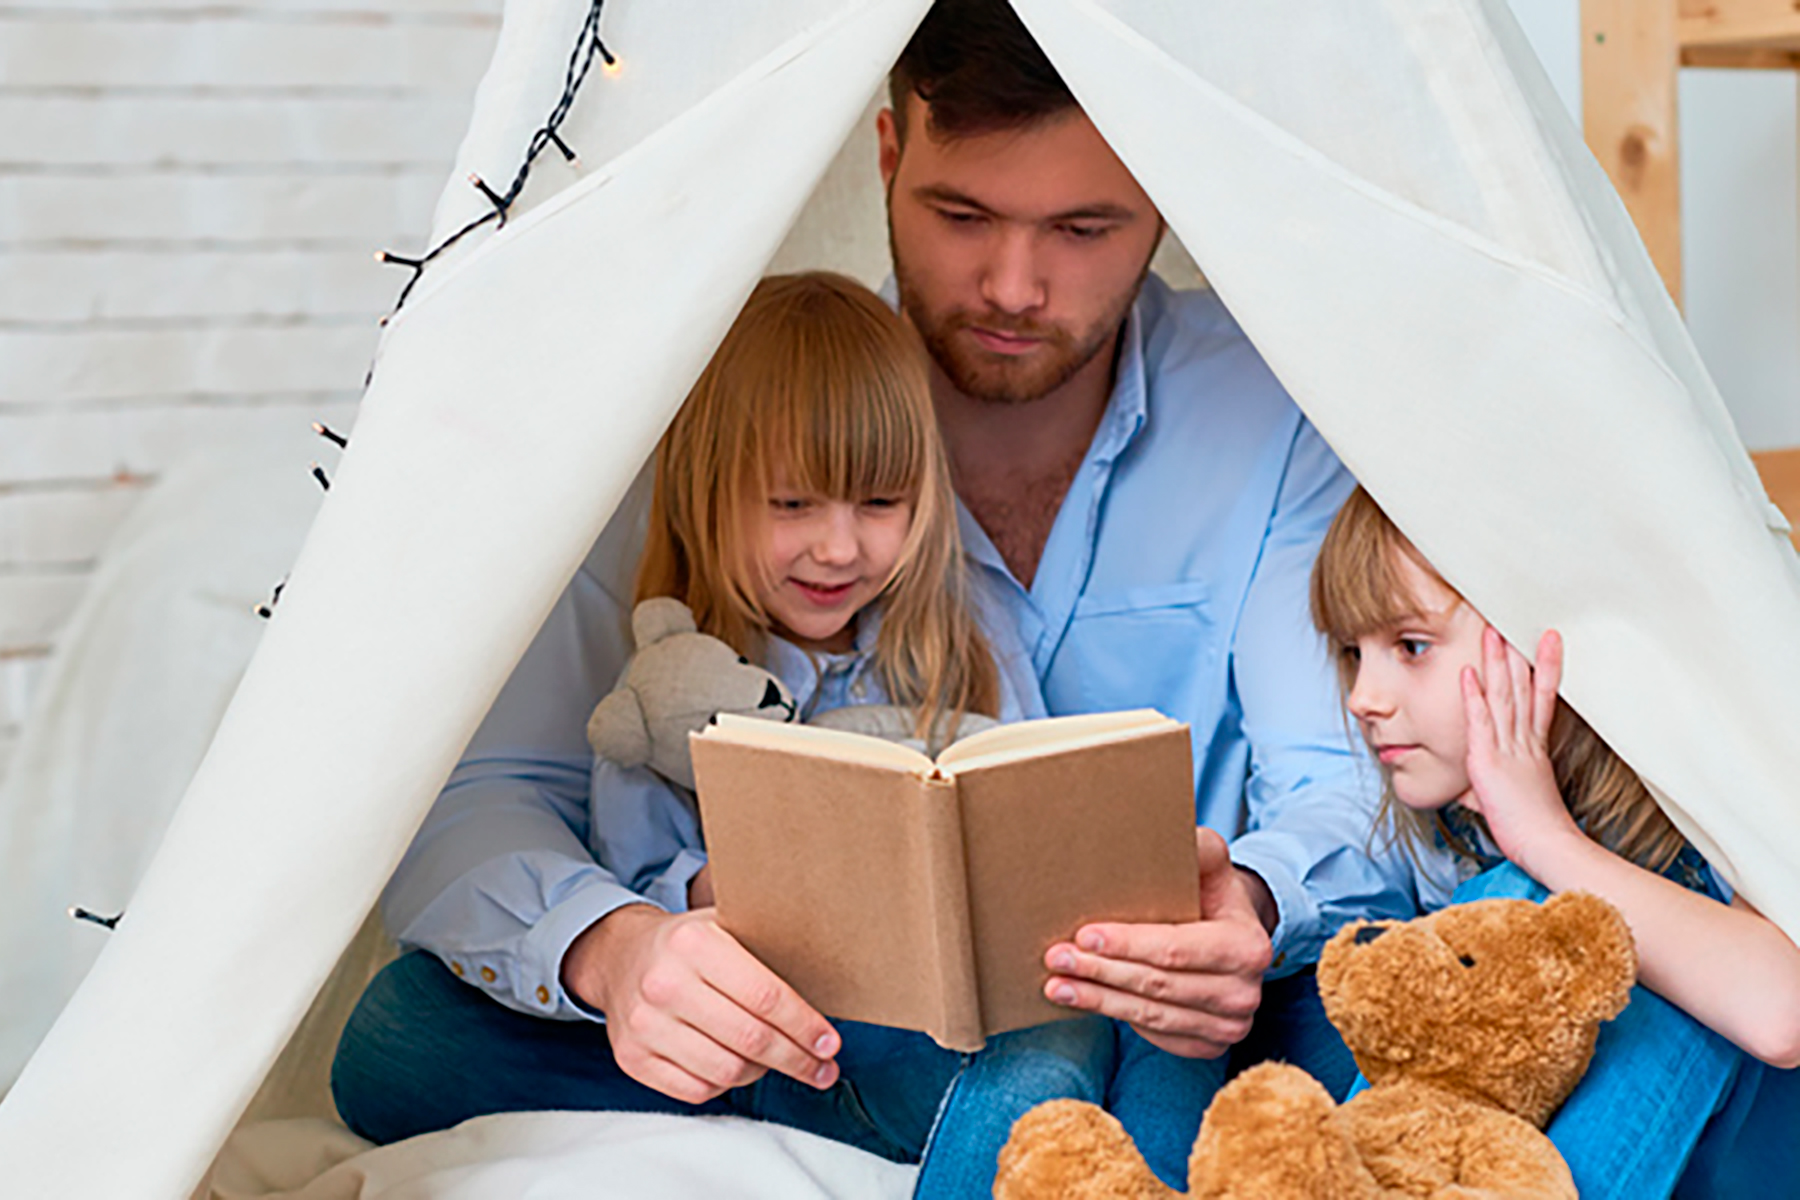 A photo of a dad sitting under an indoor canopy with his two young girls as he reads a story to them